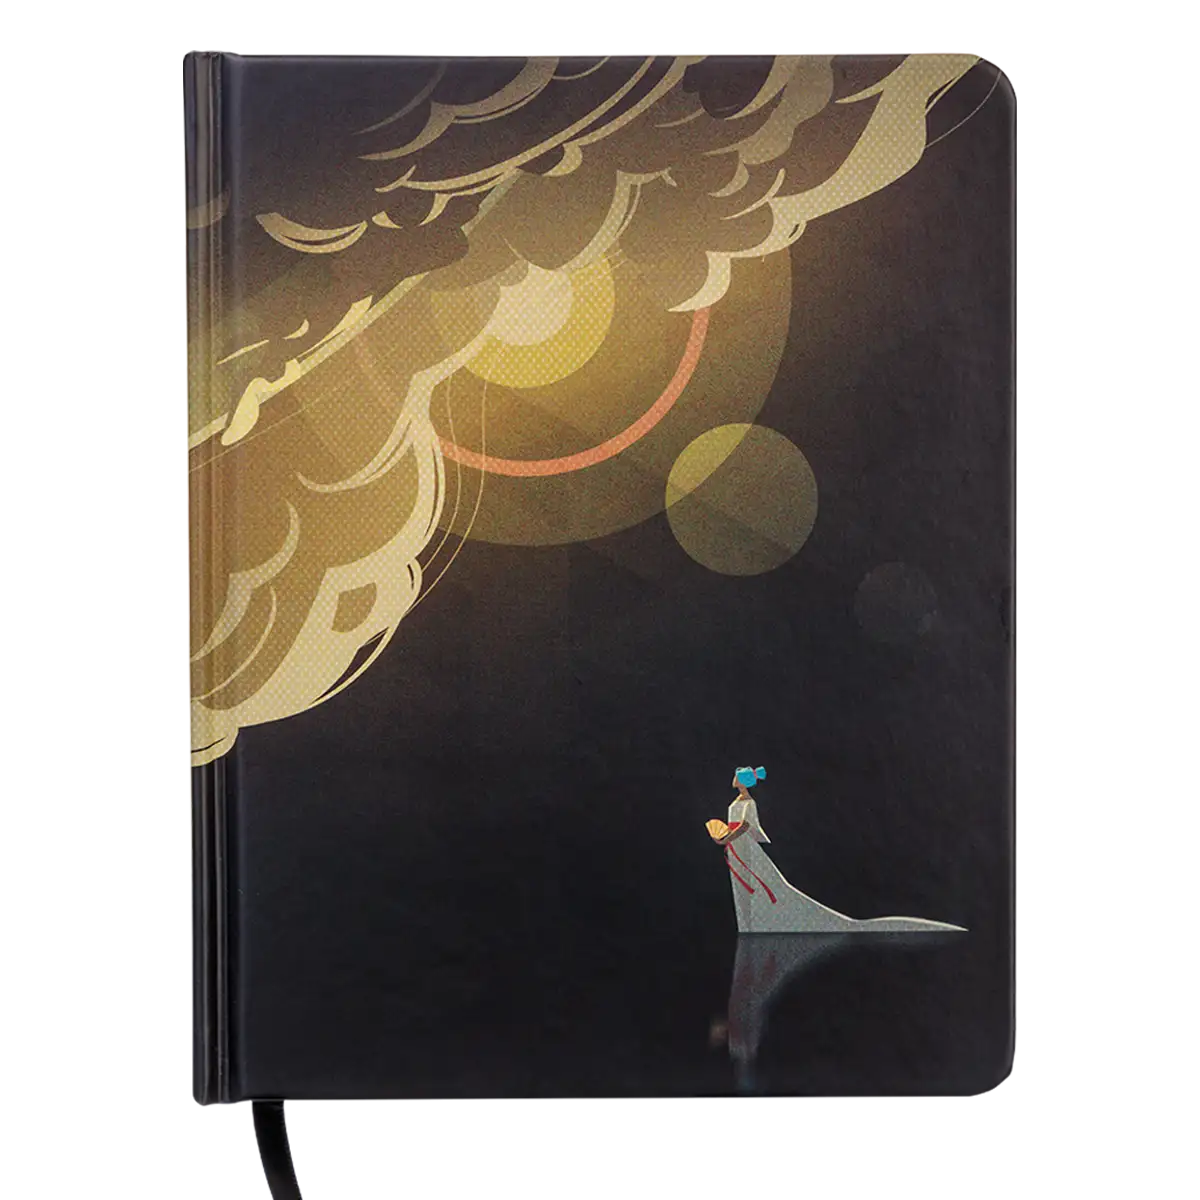 Humankind Notebook "Amplified"